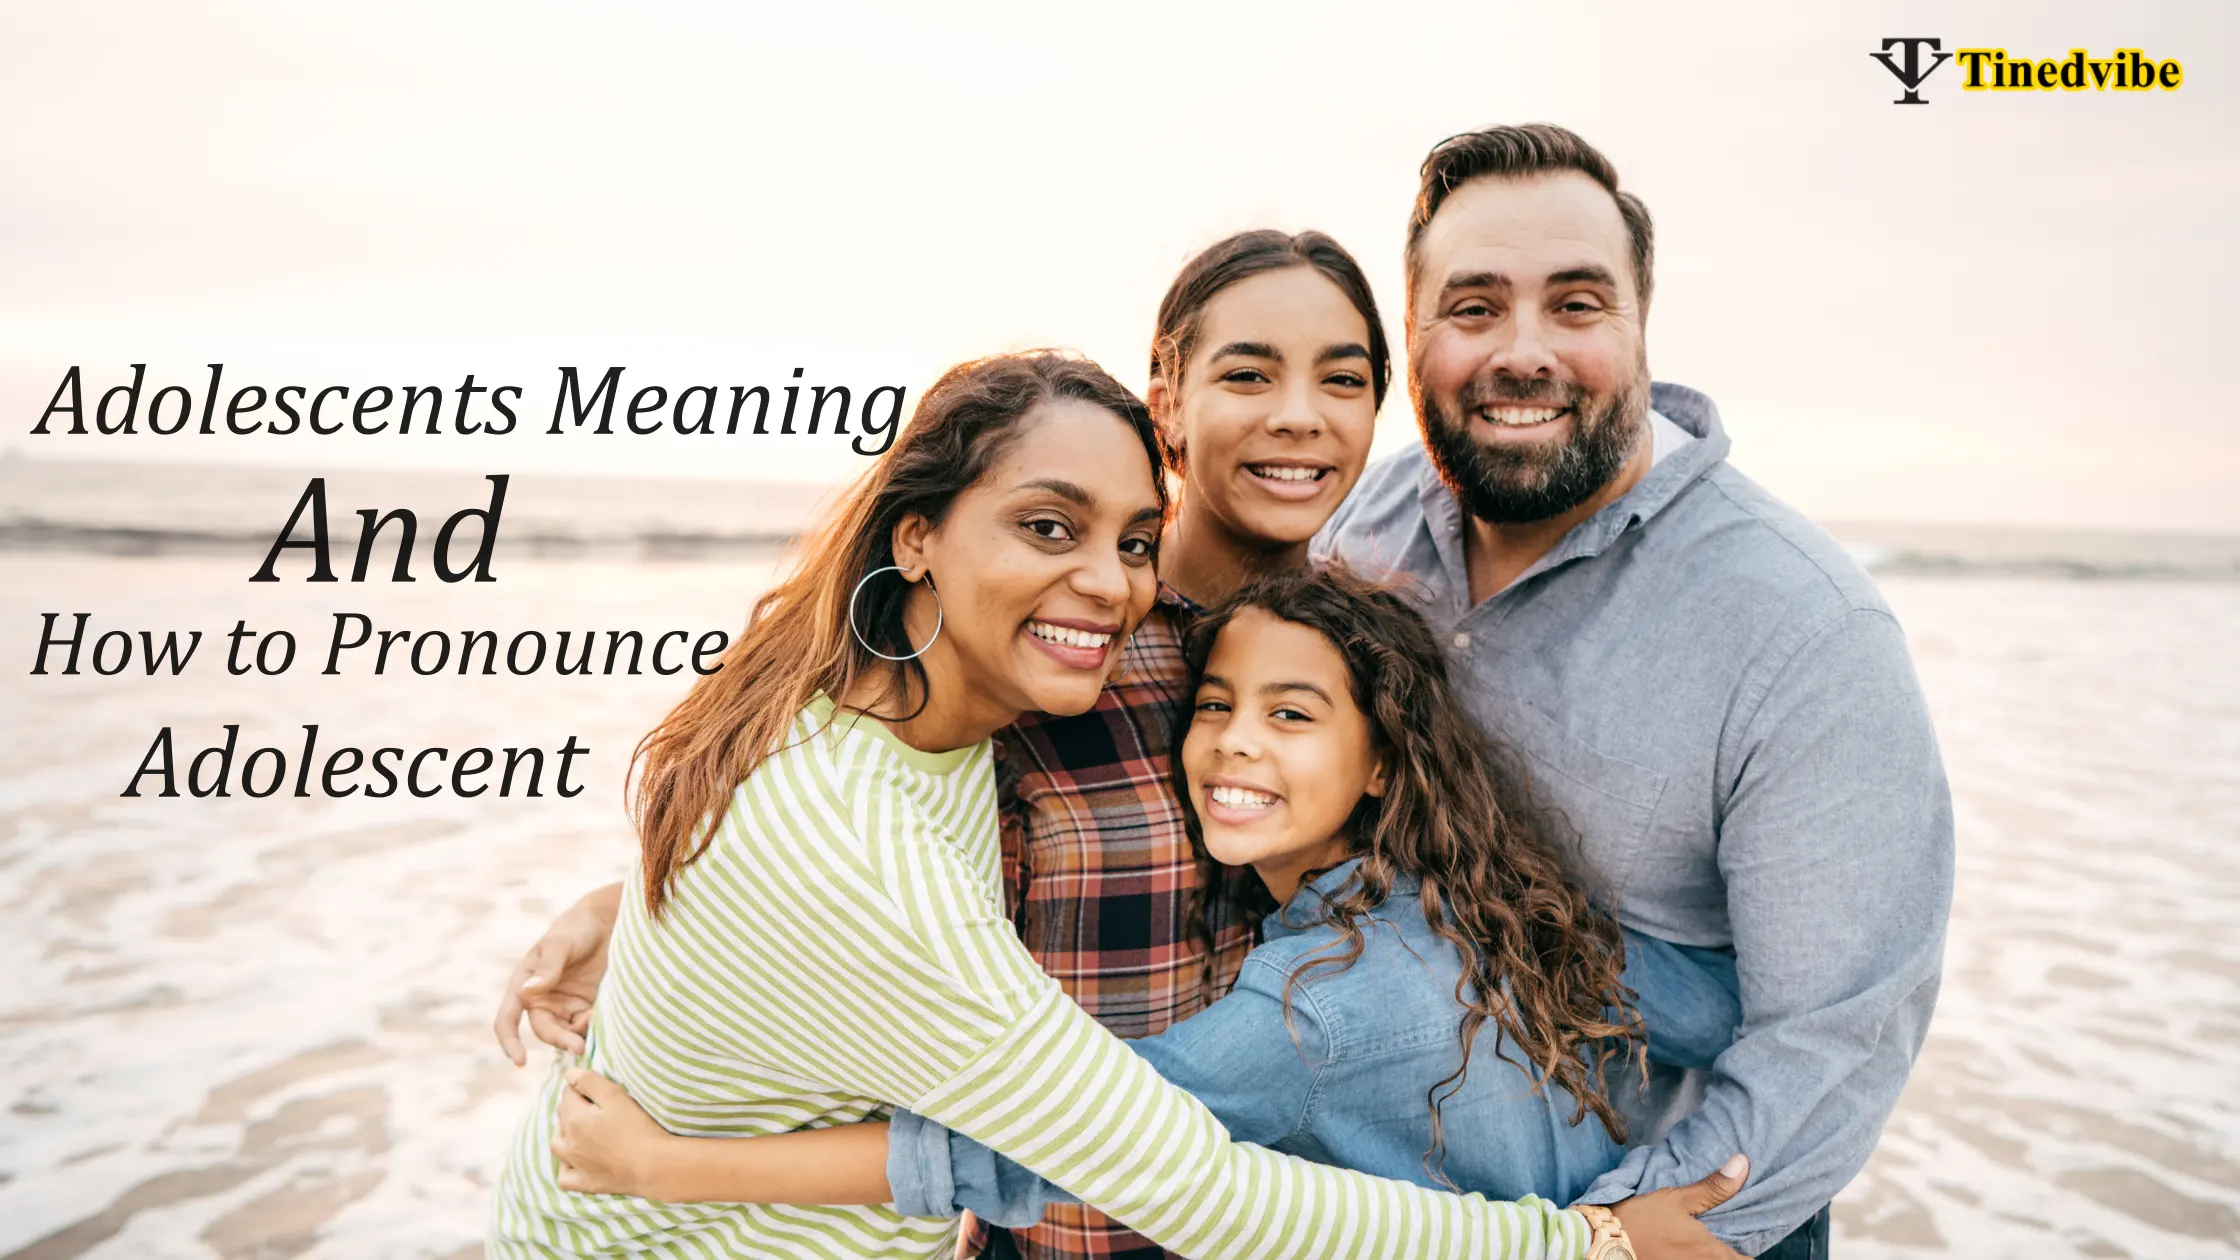 Adolescents Meaning And How to Pronounce Adolescent